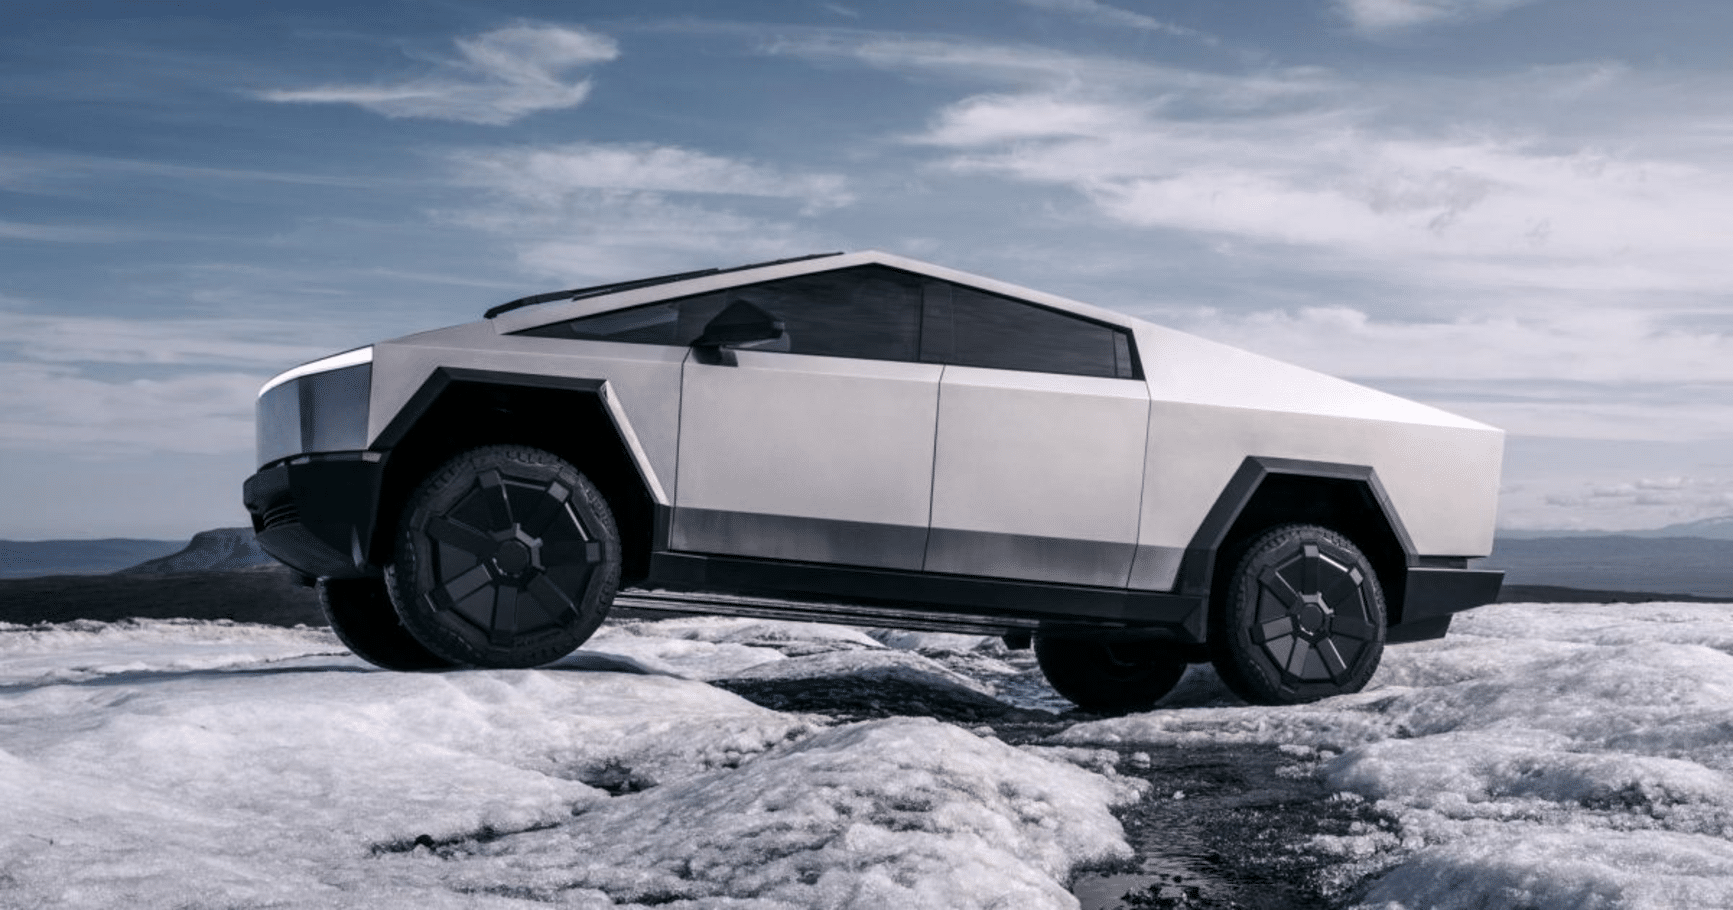 The Tesla Cybertruck: A Death Machine or the Future of Automotive Innovation?